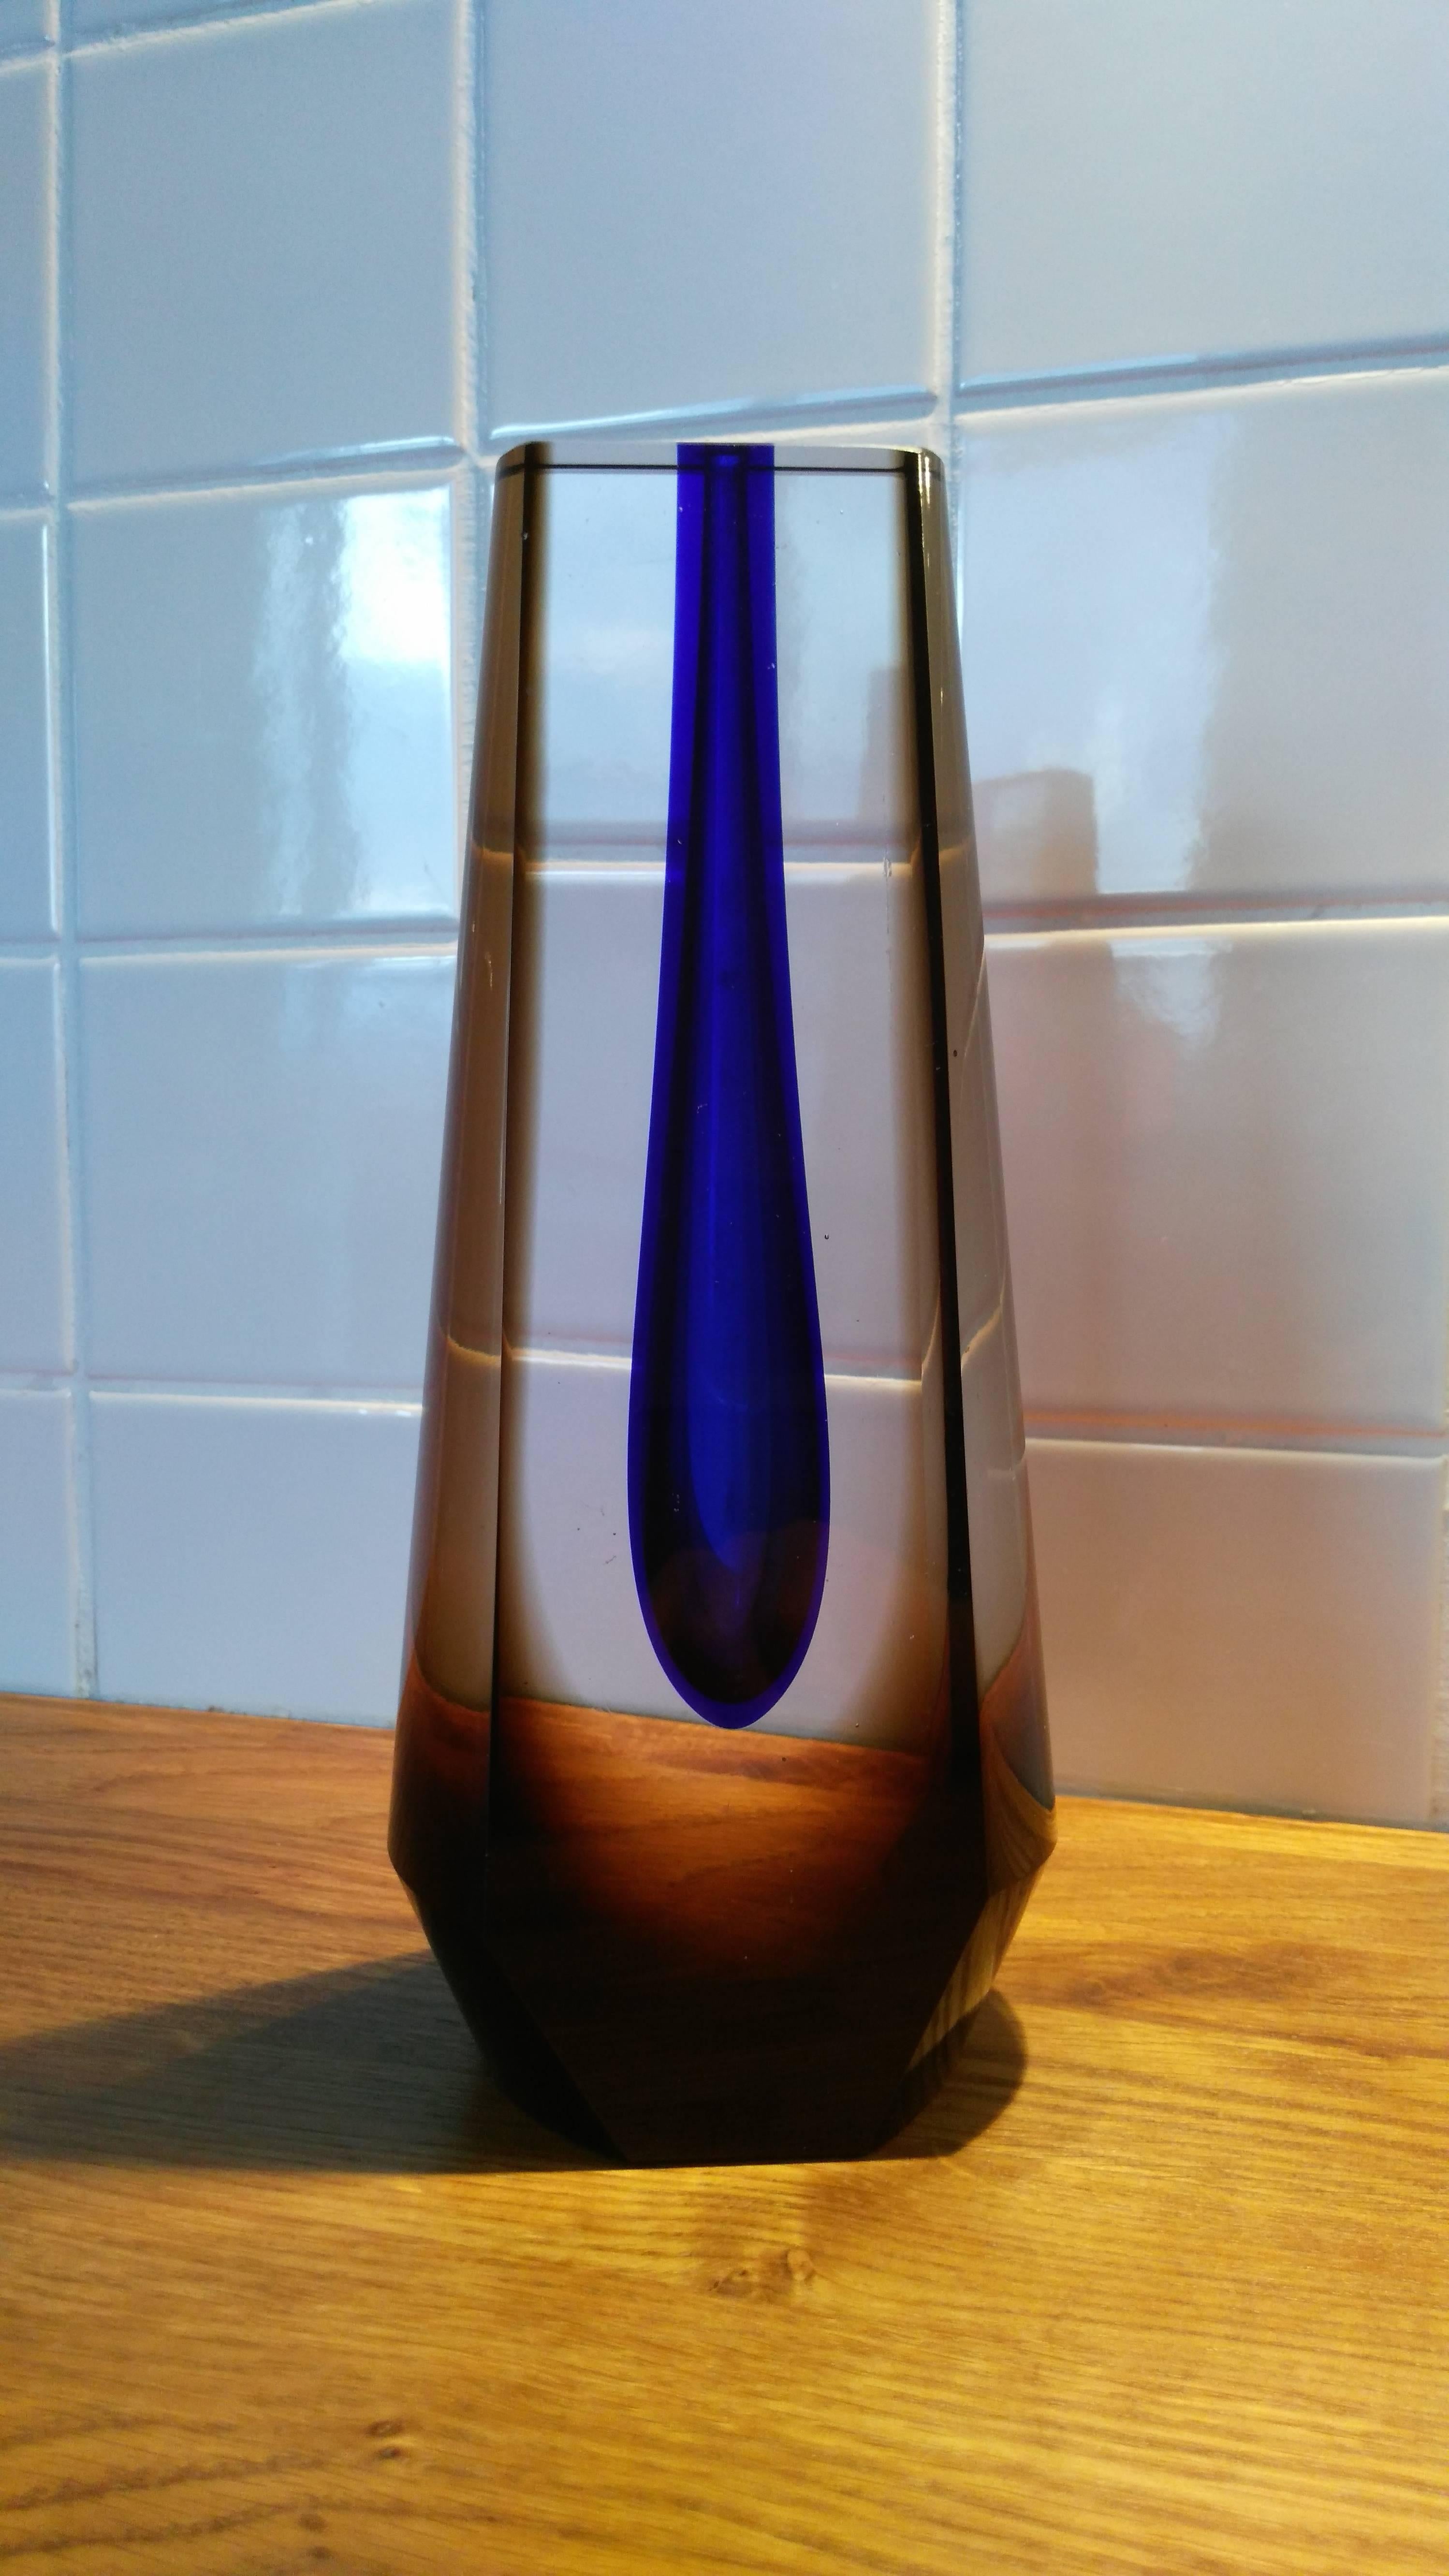 - 1970s
- One of the most famous Czech designers
- Very popular one flower vase 
- Cut and polished glass.